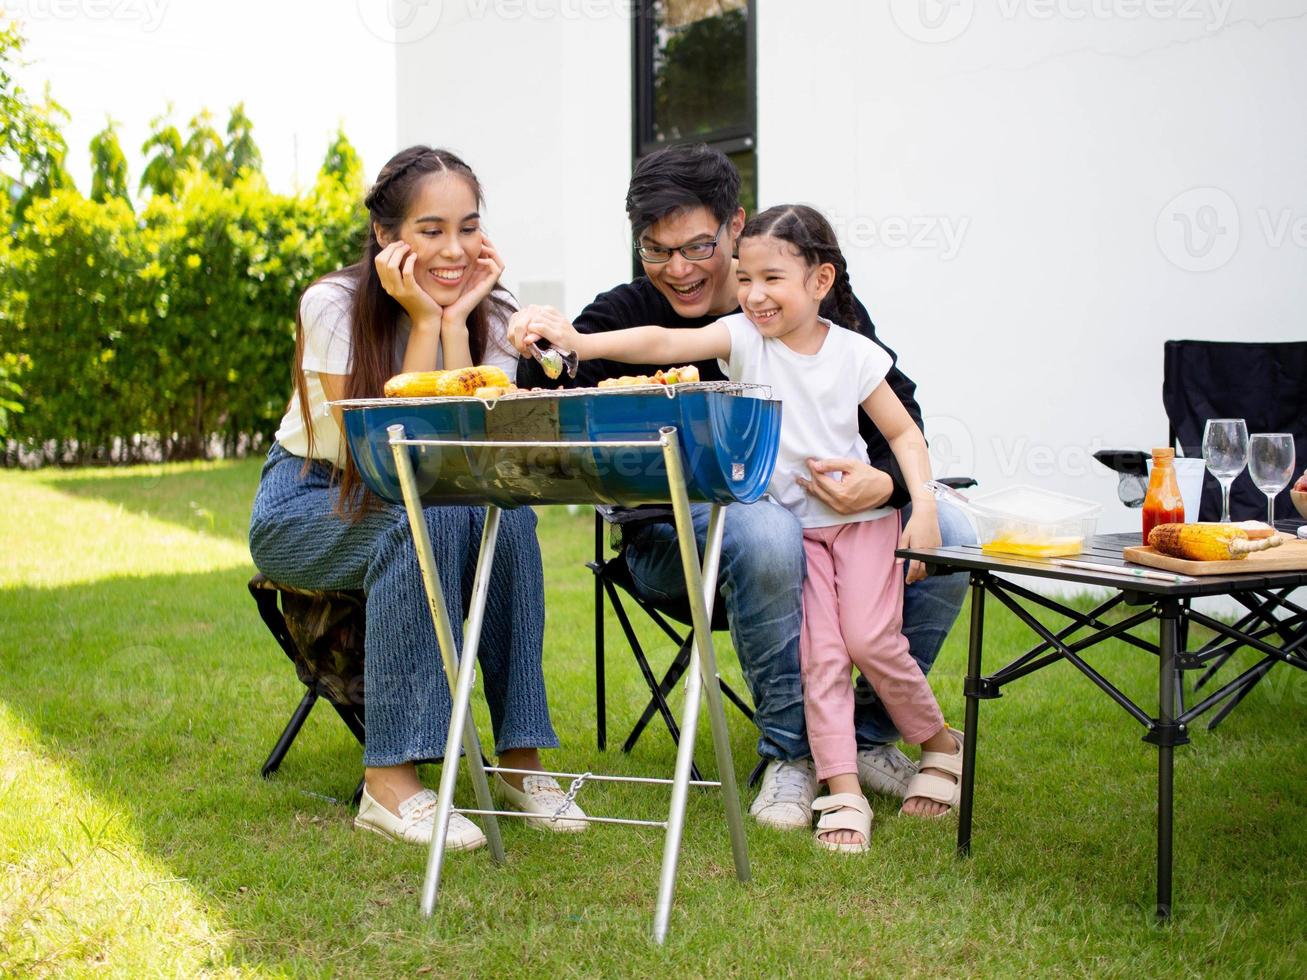 Family father mother son girl female male woman man group happy outdoor bar-b-q barbecue eating picnic holiday food meal pork delicious together vacation garden green natural smile funny party photo